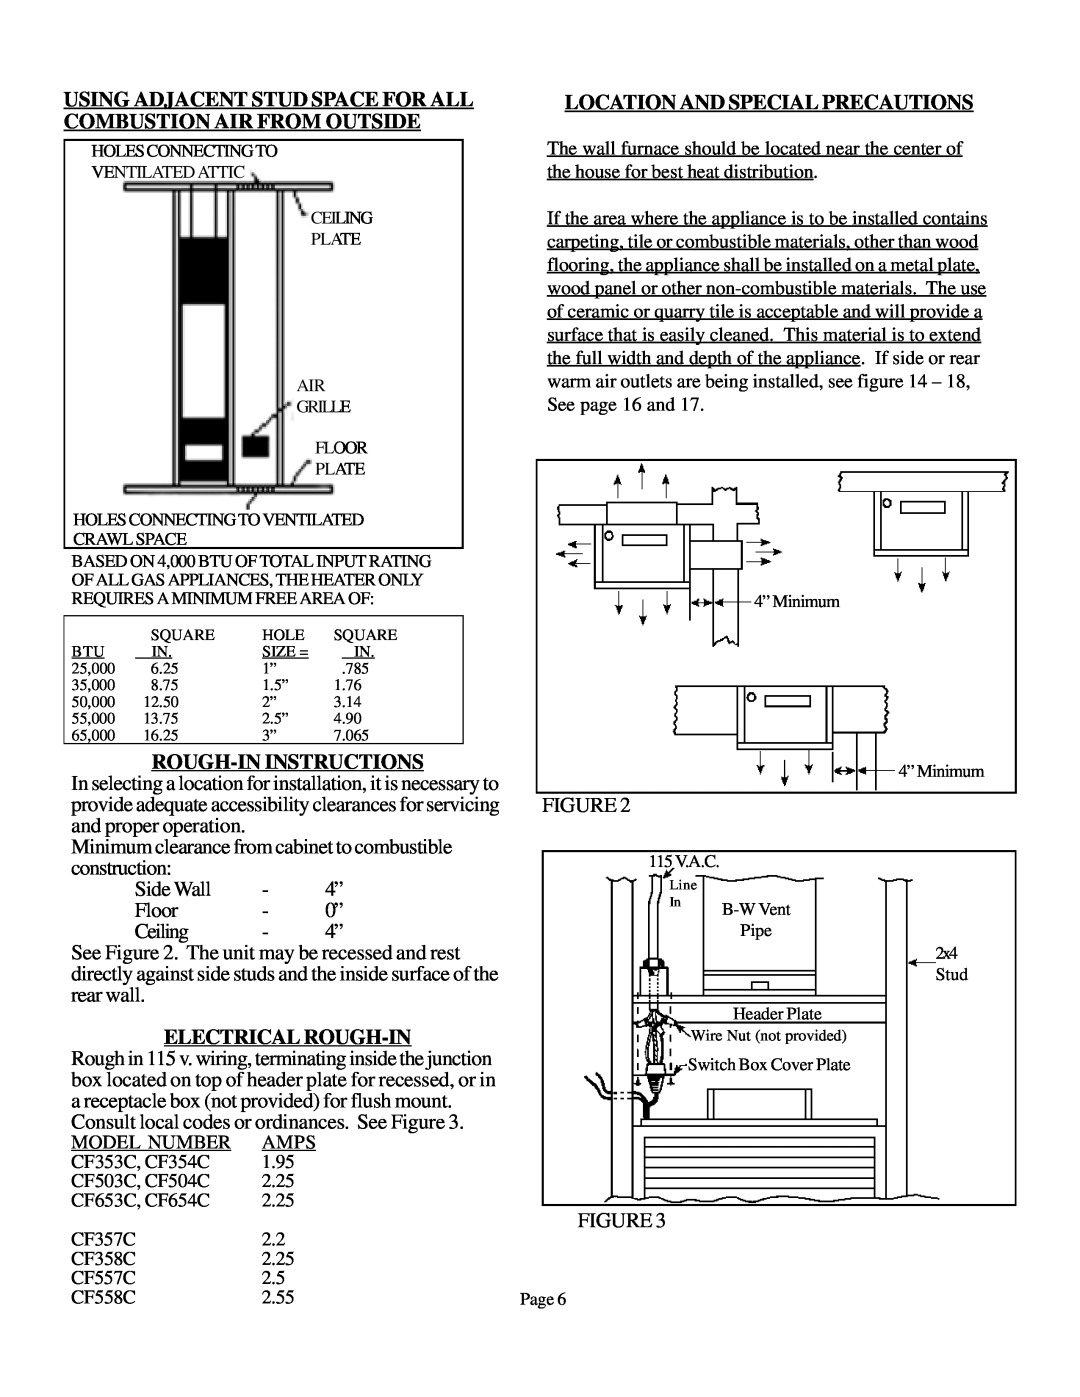 Louisville Tin and Stove CF354C-H, CF504C-H Rough-Ininstructions, Electrical Rough-In, Location And Special Precautions 